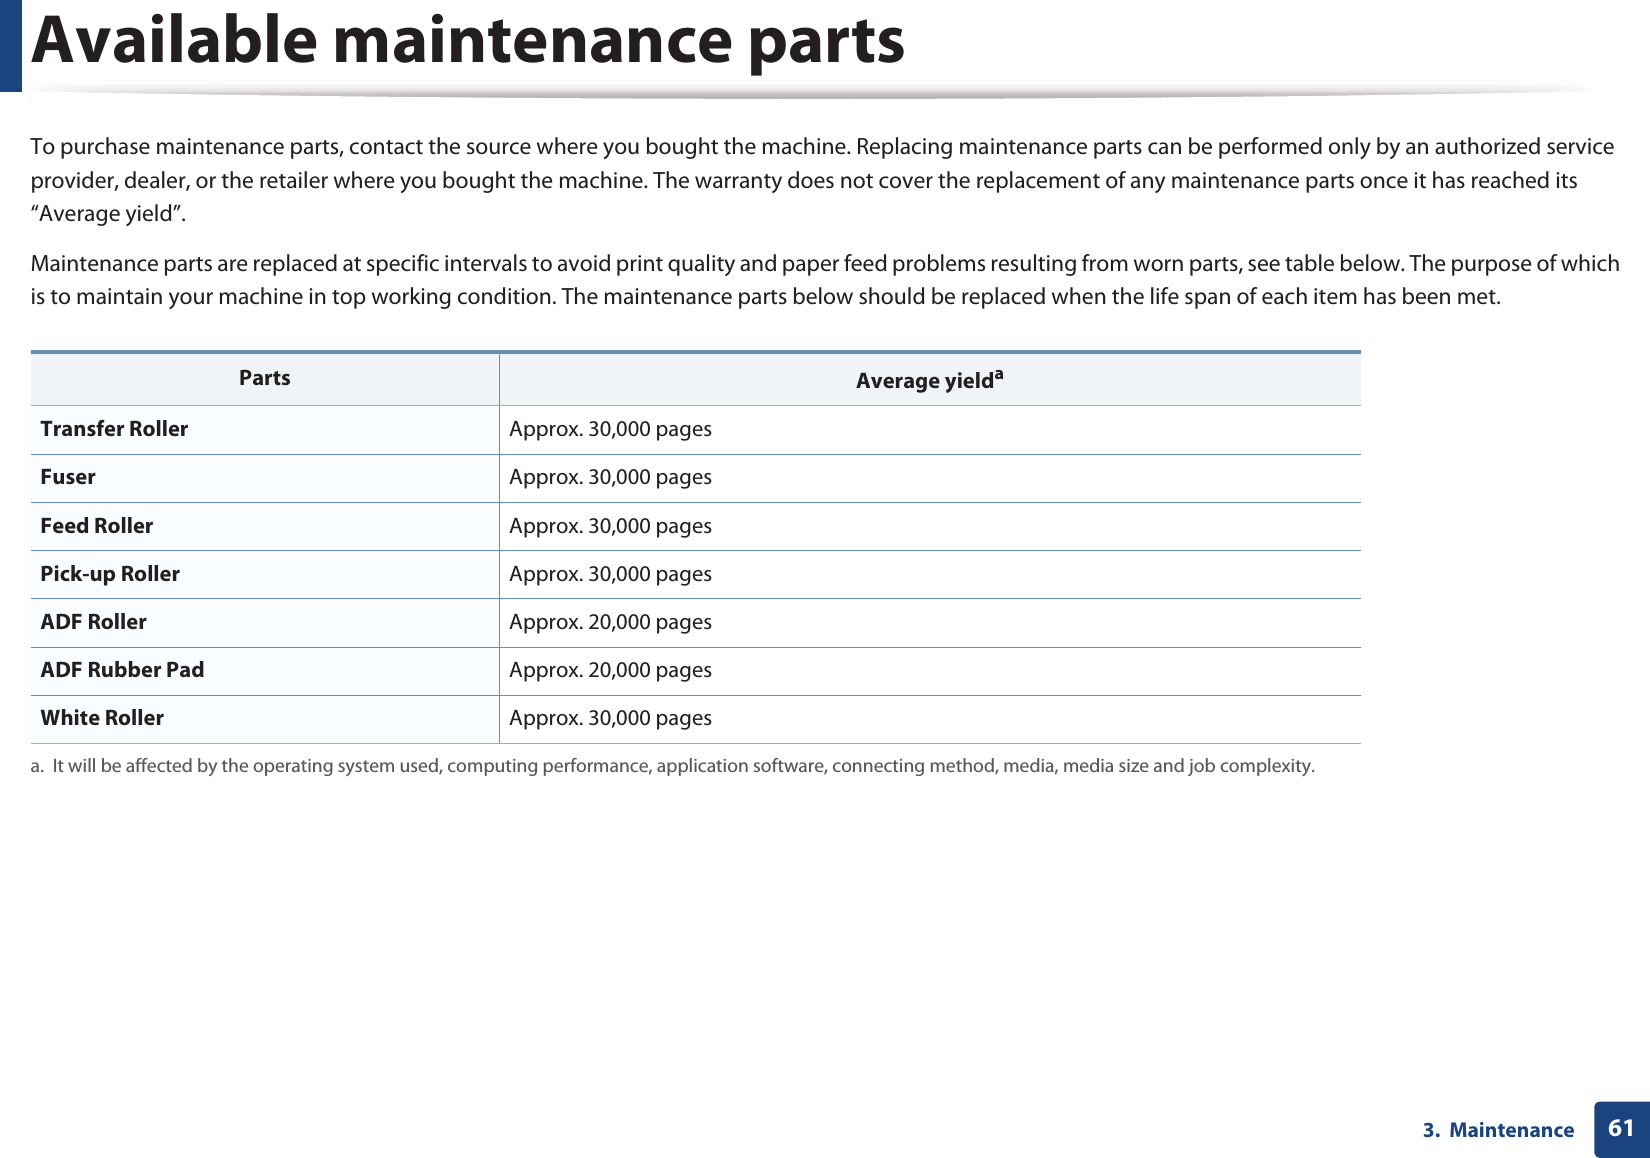 613.  MaintenanceAvailable maintenance partsTo purchase maintenance parts, contact the source where you bought the machine. Replacing maintenance parts can be performed only by an authorized service provider, dealer, or the retailer where you bought the machine. The warranty does not cover the replacement of any maintenance parts once it has reached its “Average yield”.Maintenance parts are replaced at specific intervals to avoid print quality and paper feed problems resulting from worn parts, see table below. The purpose of which is to maintain your machine in top working condition. The maintenance parts below should be replaced when the life span of each item has been met.Parts Average yieldaa. It will be affected by the operating system used, computing performance, application software, connecting method, media, media size and job complexity.Transfer Roller Approx. 30,000 pagesFuser Approx. 30,000 pagesFeed Roller Approx. 30,000 pagesPick-up Roller Approx. 30,000 pagesADF Roller Approx. 20,000 pagesADF Rubber Pad Approx. 20,000 pagesWhite Roller Approx. 30,000 pages